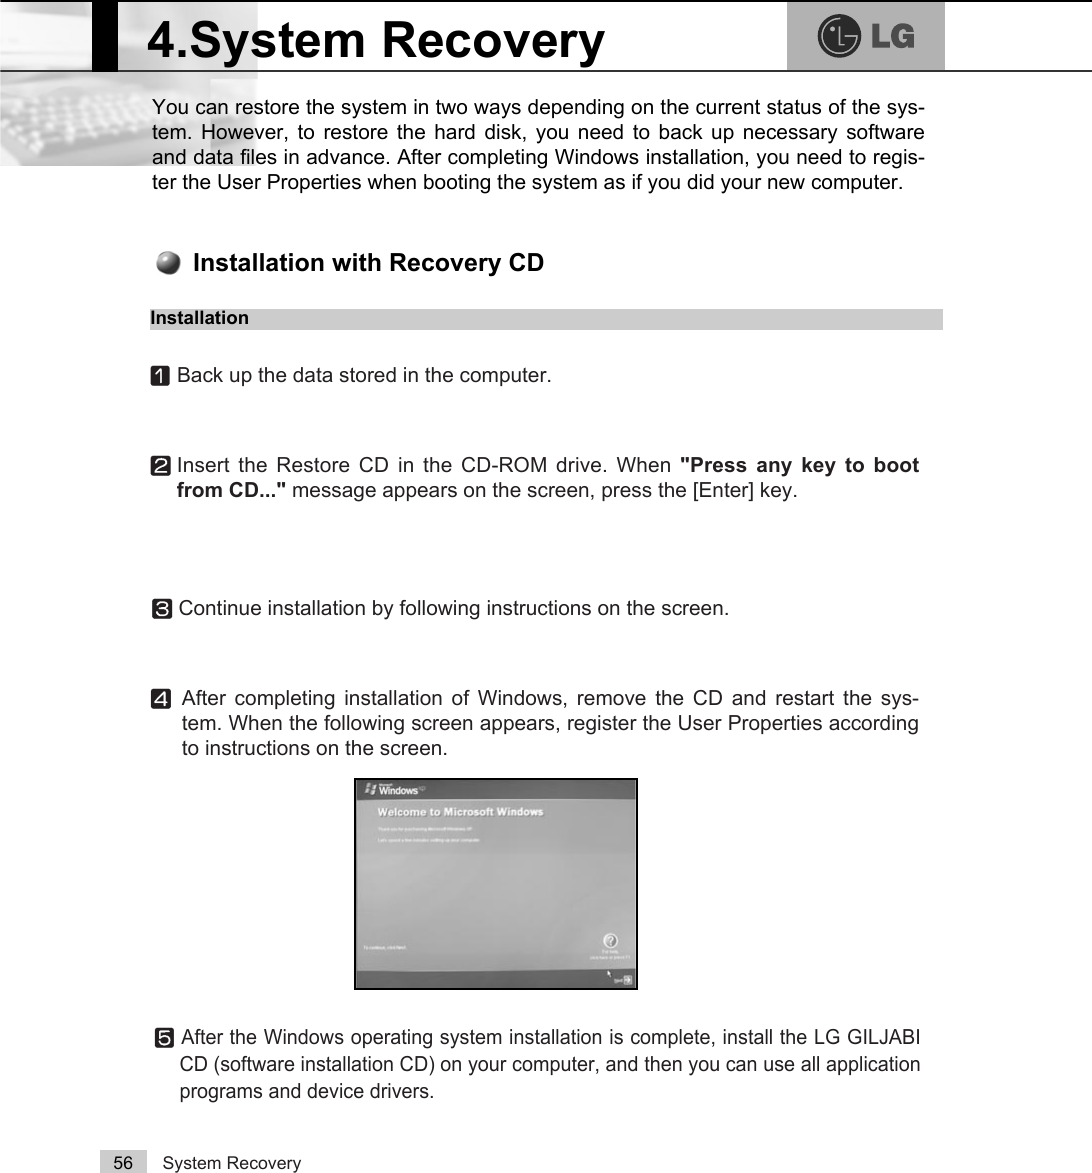 System Recovery56You can restore the system in two ways depending on the current status of the sys-tem. However, to restore the hard disk, you need to back up necessary softwareand data files in advance. After completing Windows installation, you need to regis-ter the User Properties when booting the system as if you did your new computer.4.System RecoveryⓞBack up the data stored in the computer.ⓟInsert the Restore CD in the CD-ROM drive. When &quot;Press any key to bootfrom CD...&quot; message appears on the screen, press the [Enter] key. ⓠContinue installation by following instructions on the screen. ⓡAfter completing installation of Windows, remove the CD and restart the sys-tem. When the following screen appears, register the User Properties accordingto instructions on the screen. Installation with Recovery CDInstallationⓢAfter the Windows operating system installation is complete, install the LG GILJABICD (software installation CD) on your computer, and then you can use all applicationprograms and device drivers. 